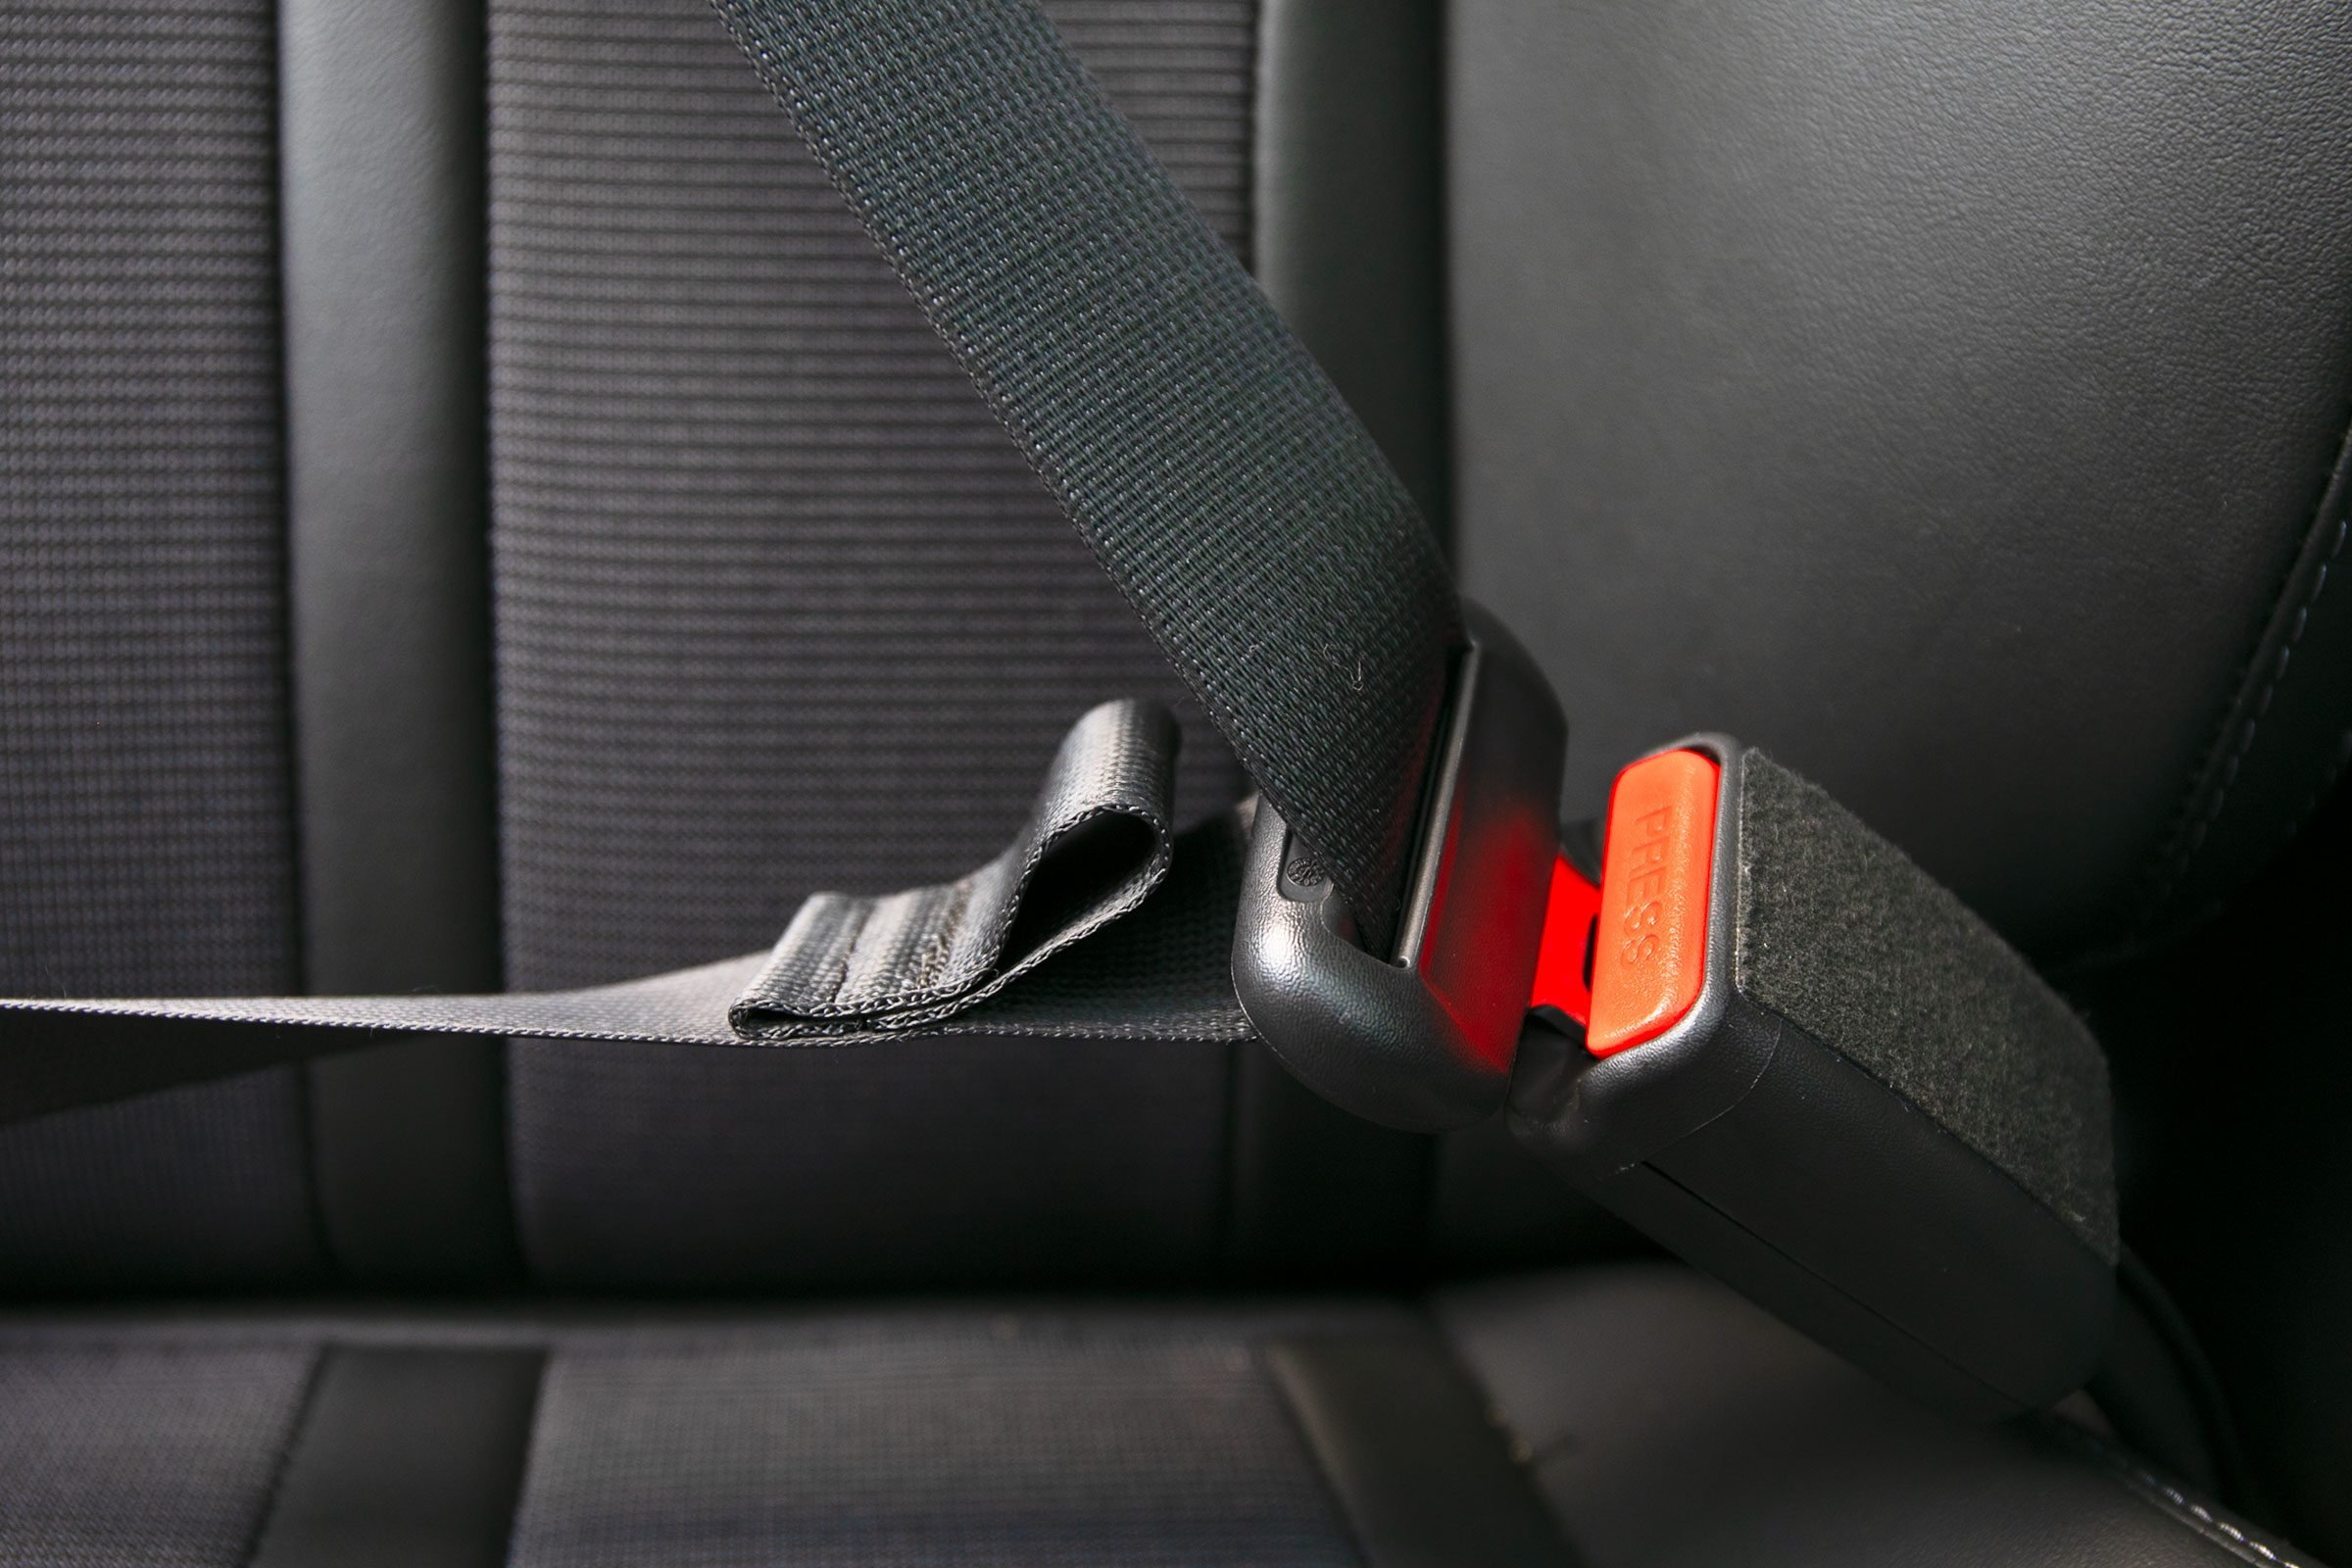 Why The Seat Belt Won’t Pull Out Or Retract